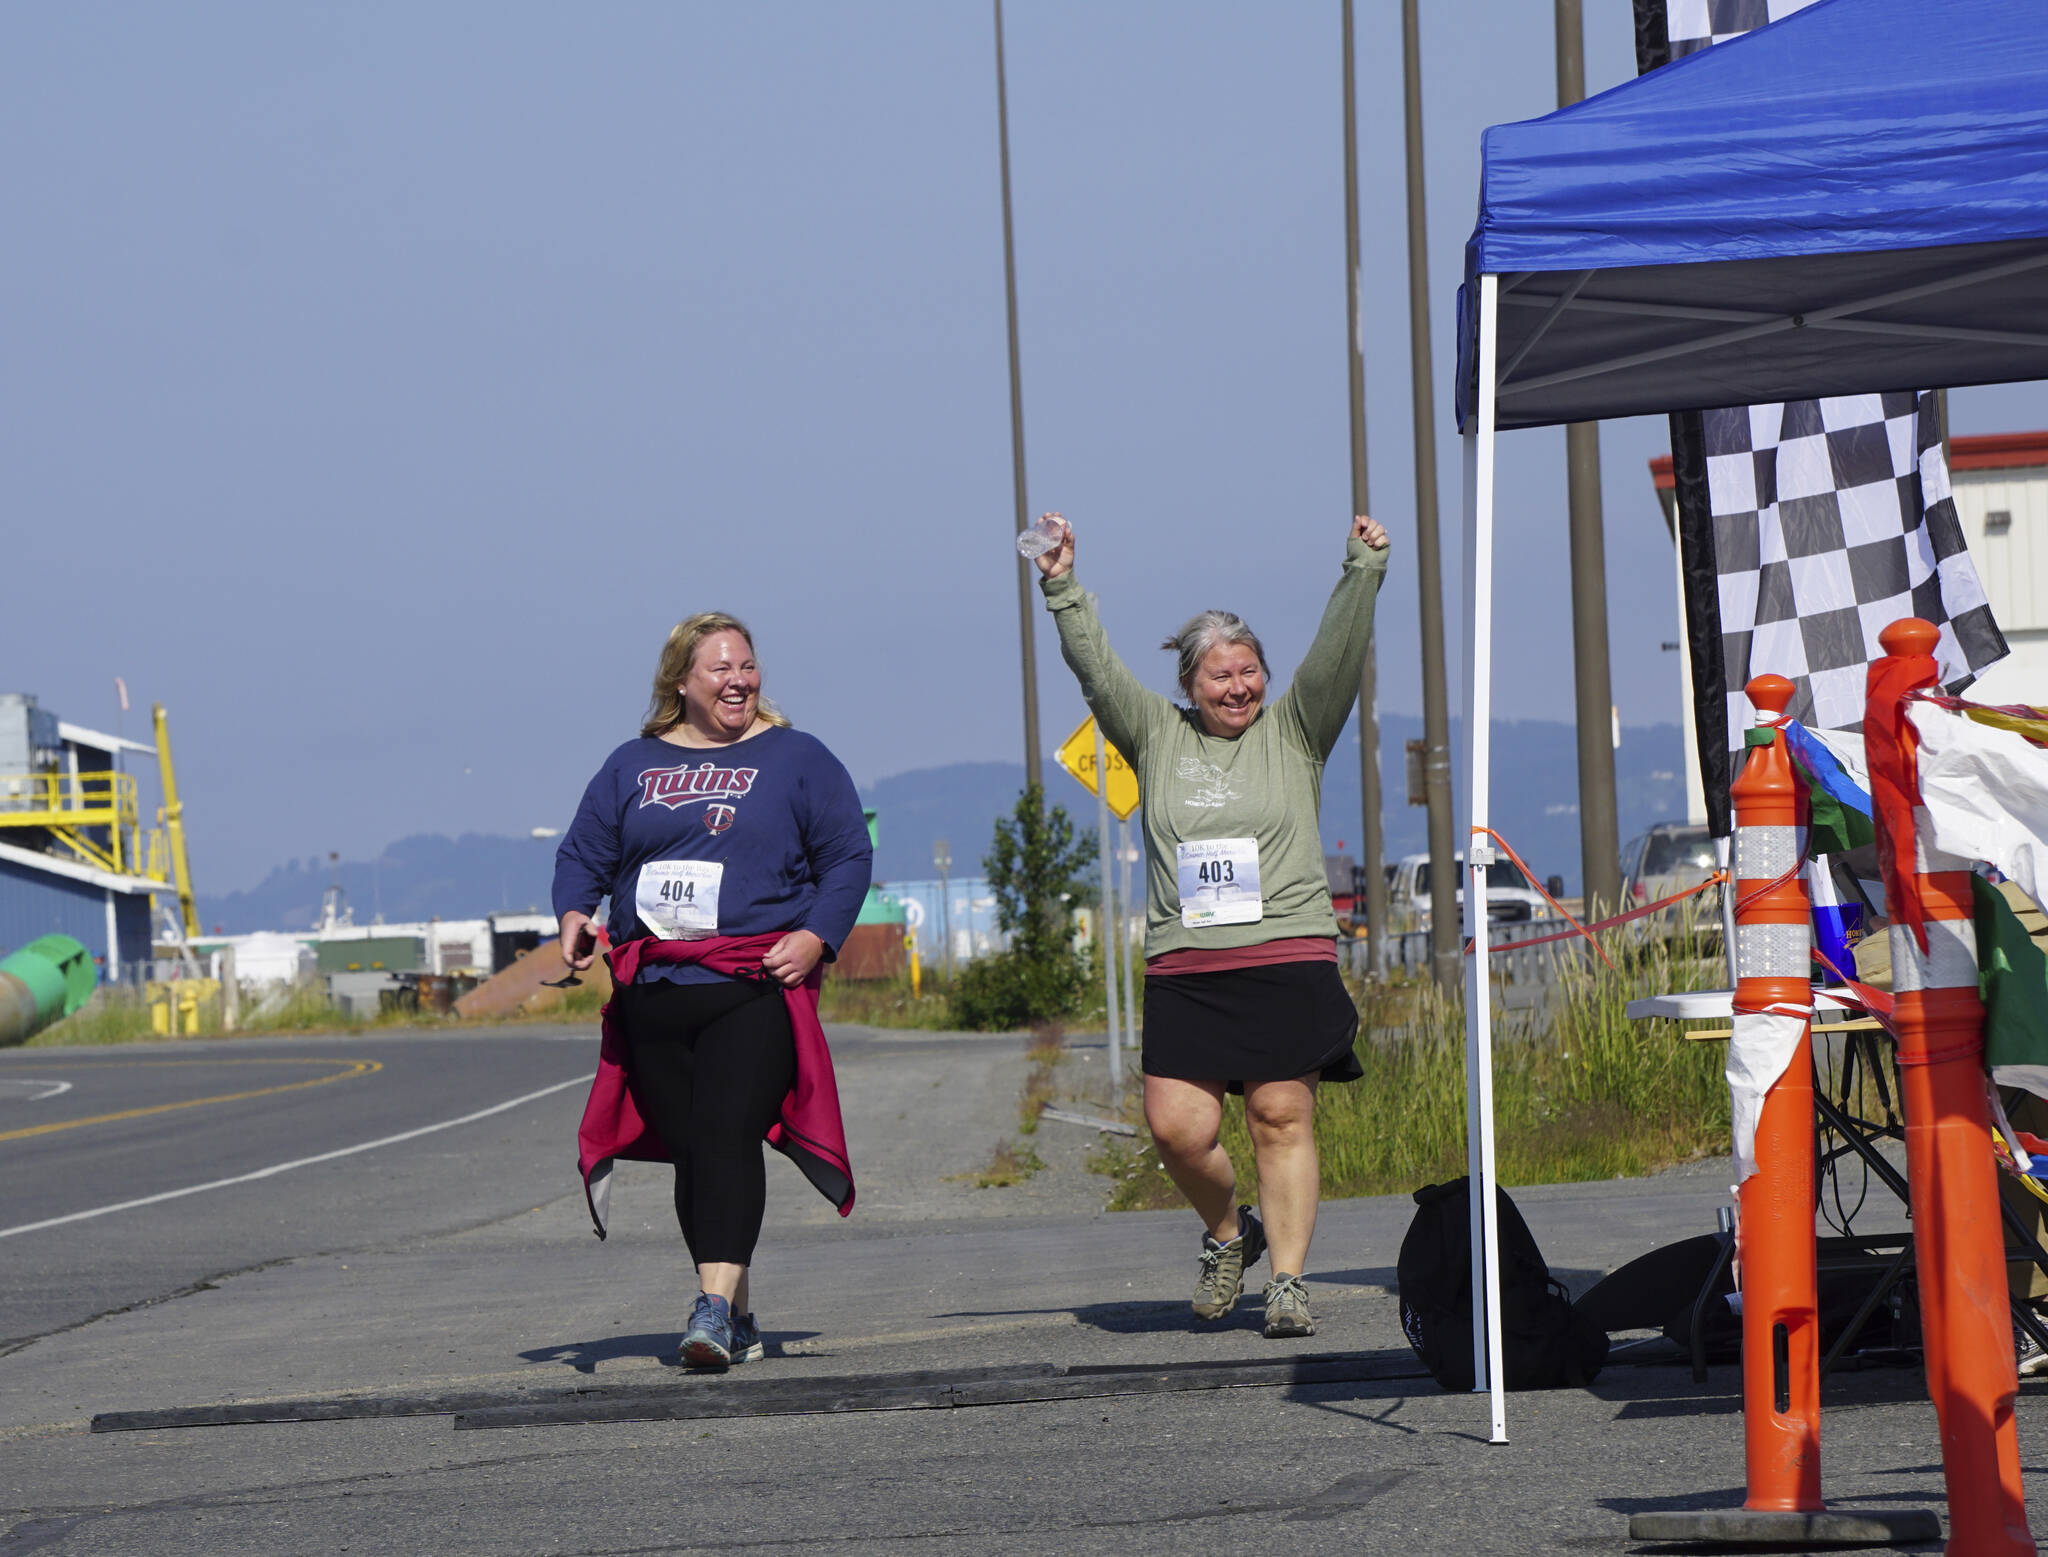 Walkers Jenny Johnson, left, and Jane Nollar, right, cross the finish line in the 2022 Homer Spit Run on Saturday, June 25, 2022, at the End of the Road Park in Homer, Alaska. (Photo by Michael Armstrong/Homer News)